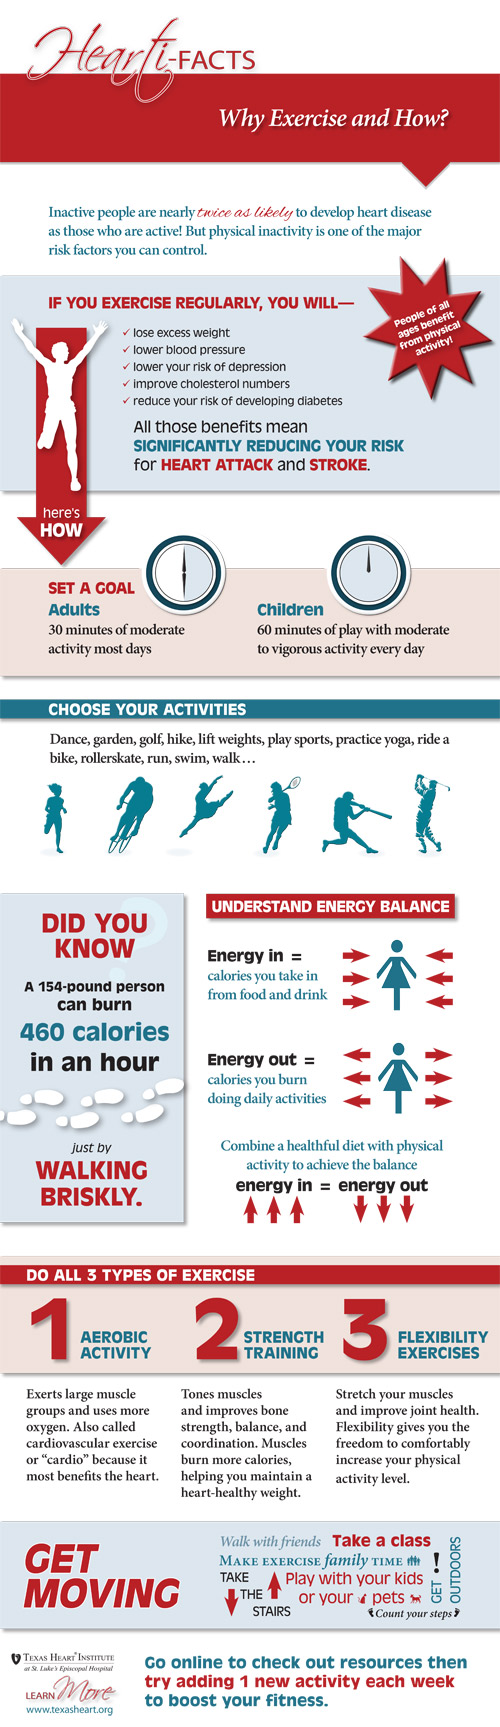 Cardio Exercise Facts